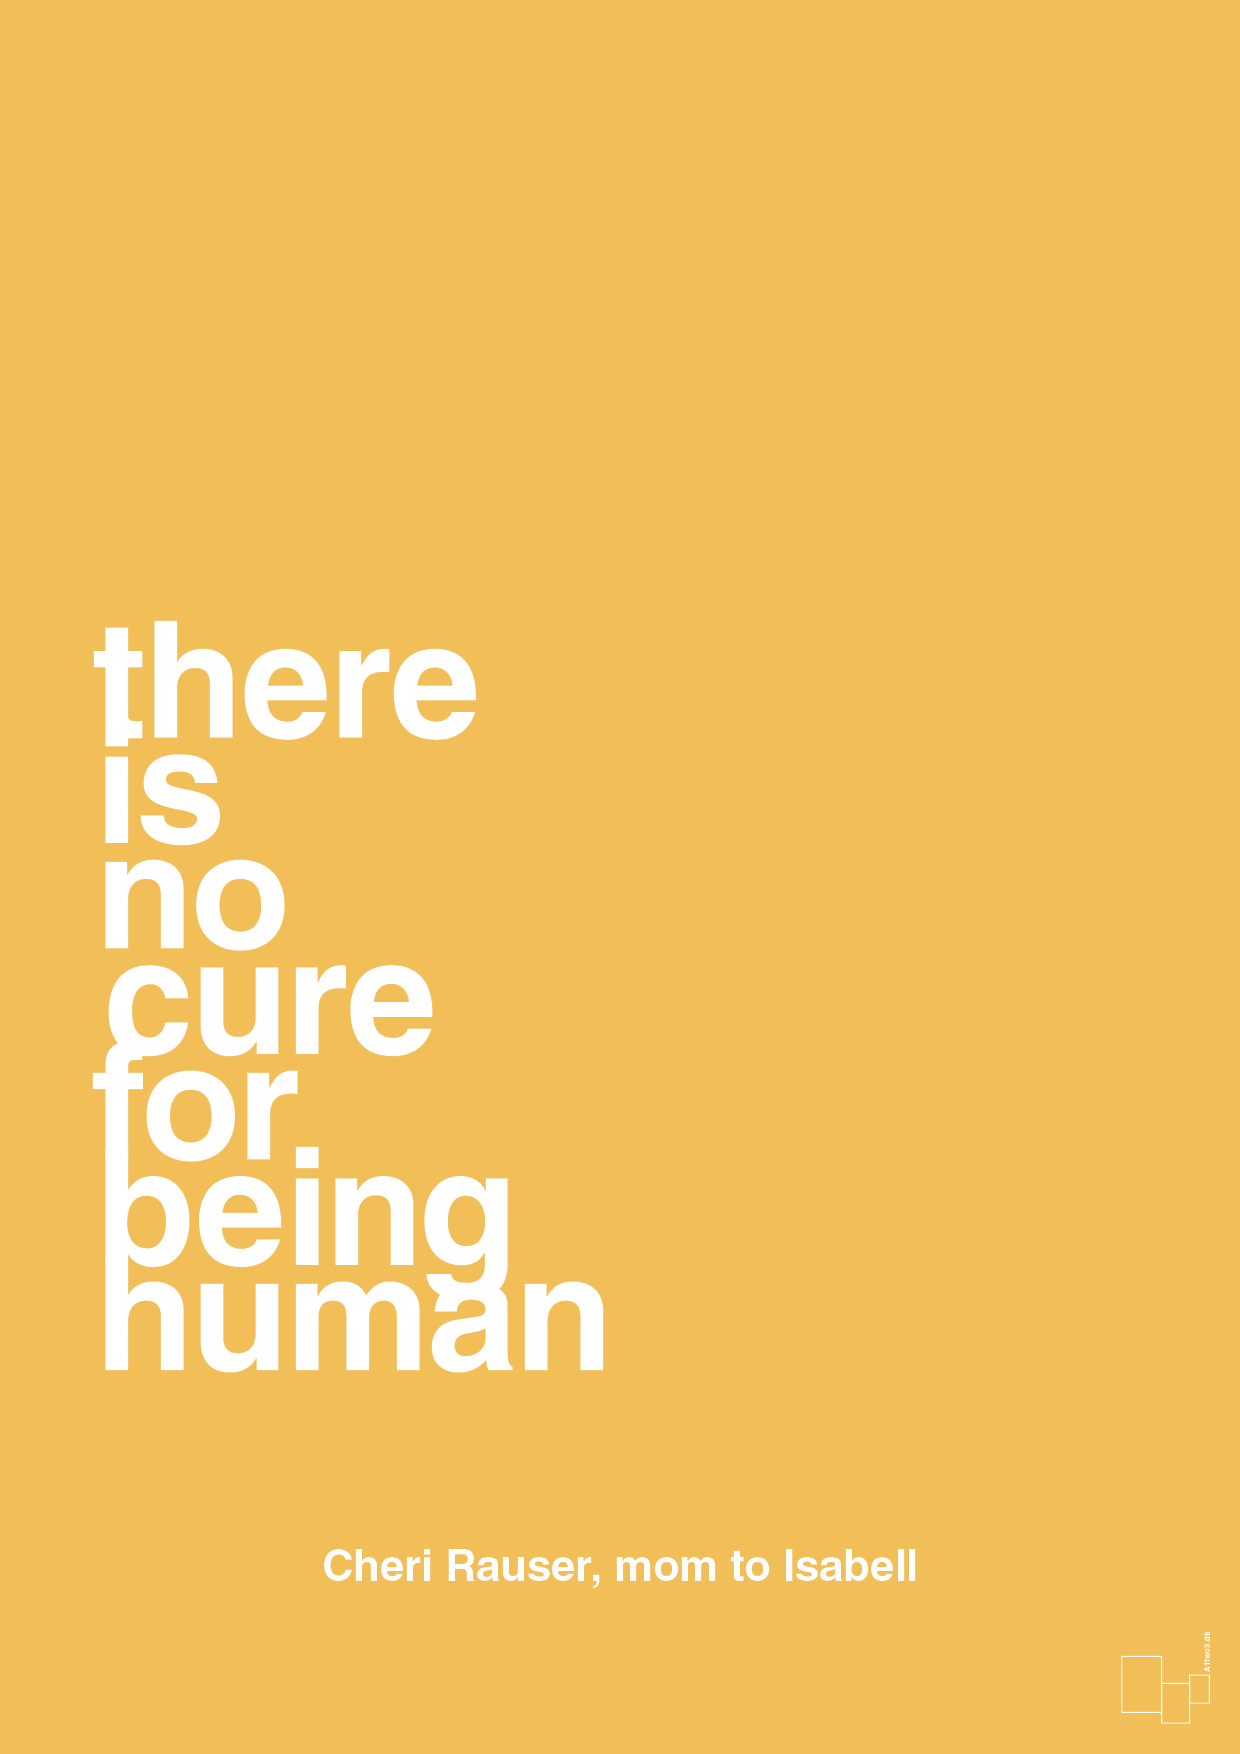 there is no cure for being human - Plakat med Samfund i Honeycomb